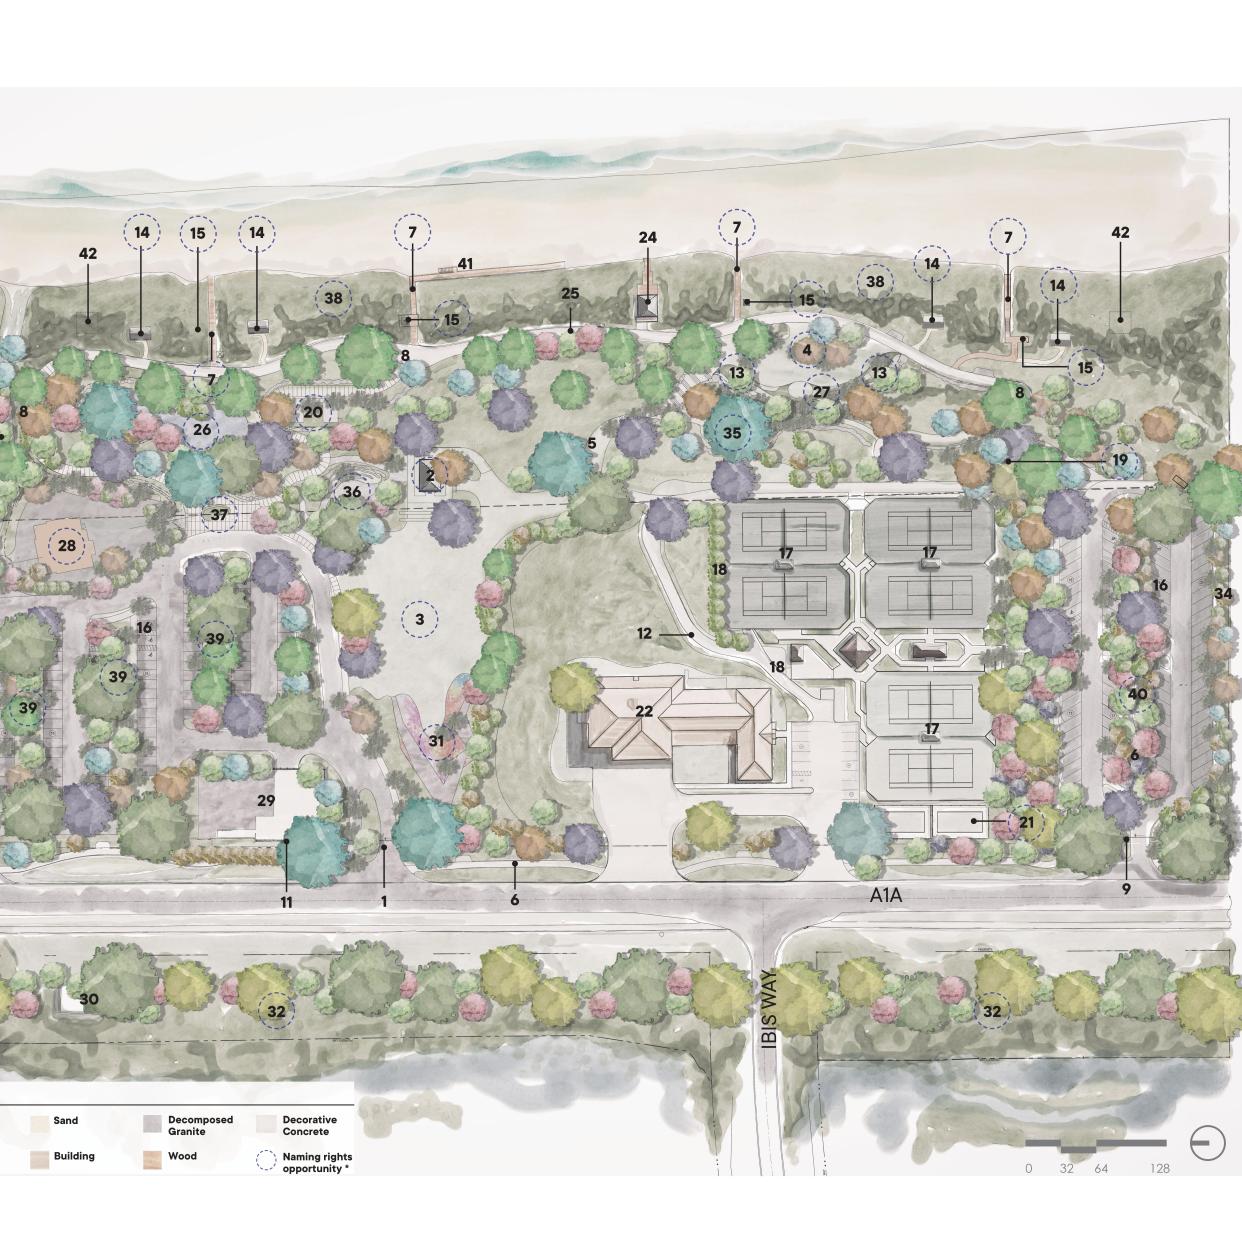 In December, the Town Council granted special exception and site plan approval for the $30 million redevelopment of Phipps Ocean Park. Two pickleball courts were approved as part of the site plan Feb. 14.